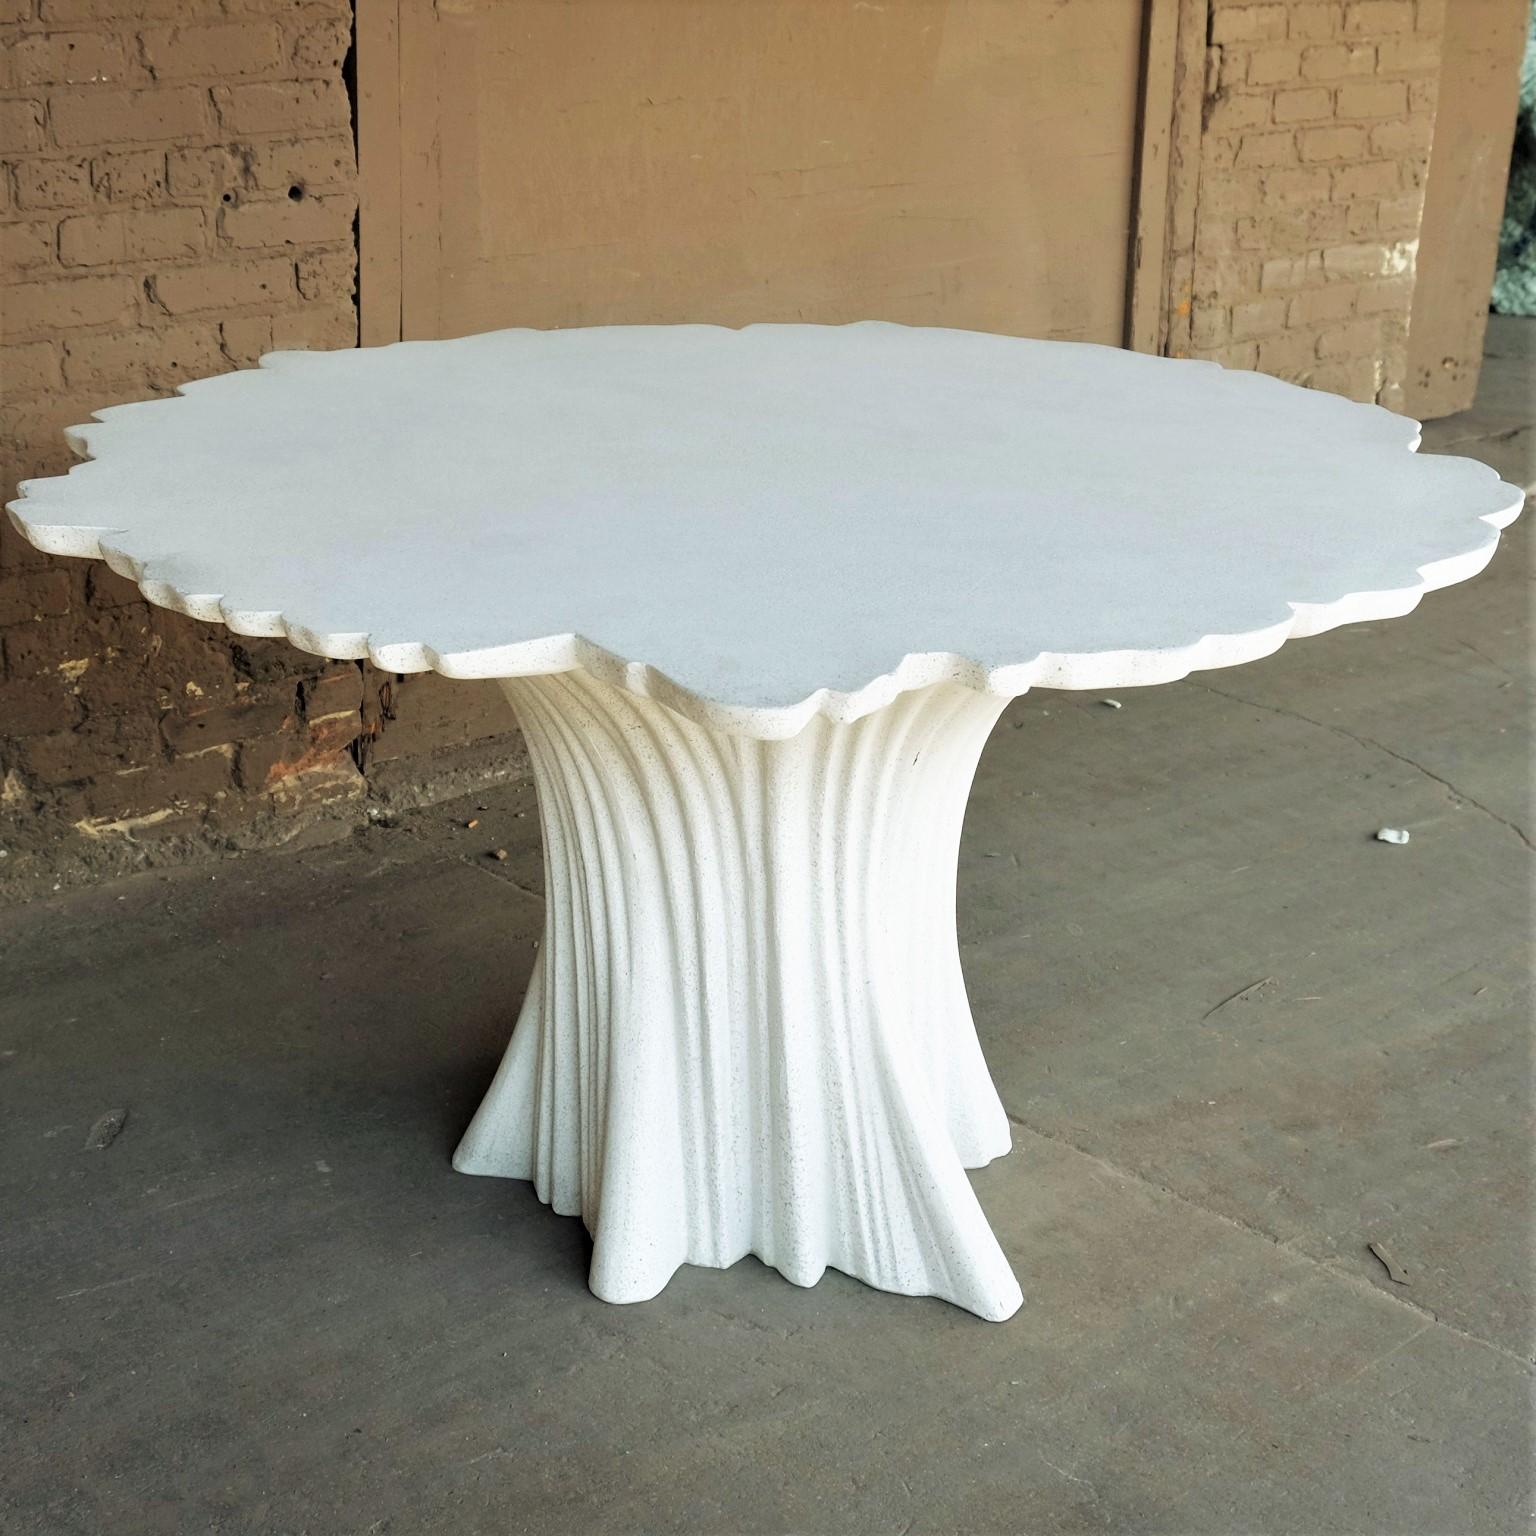 Minimalist Cast Resin 'Perennial Cypress' Dining Table, White Stone by Zachary A. Design For Sale